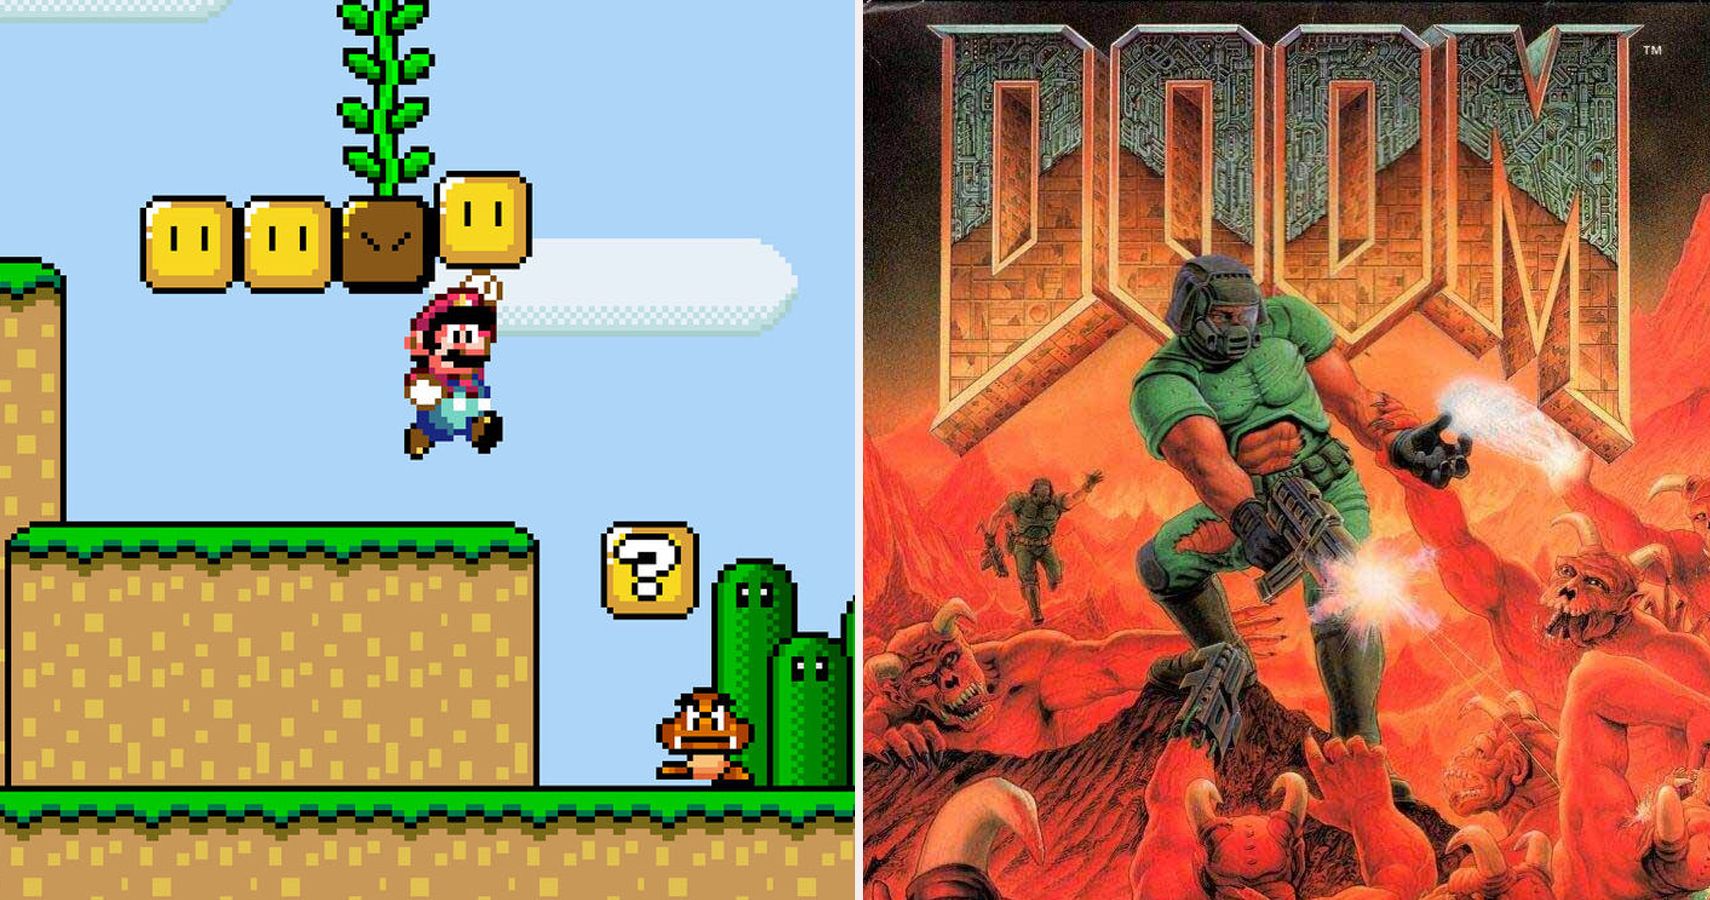 The best game of every year since 1995, according to reviews